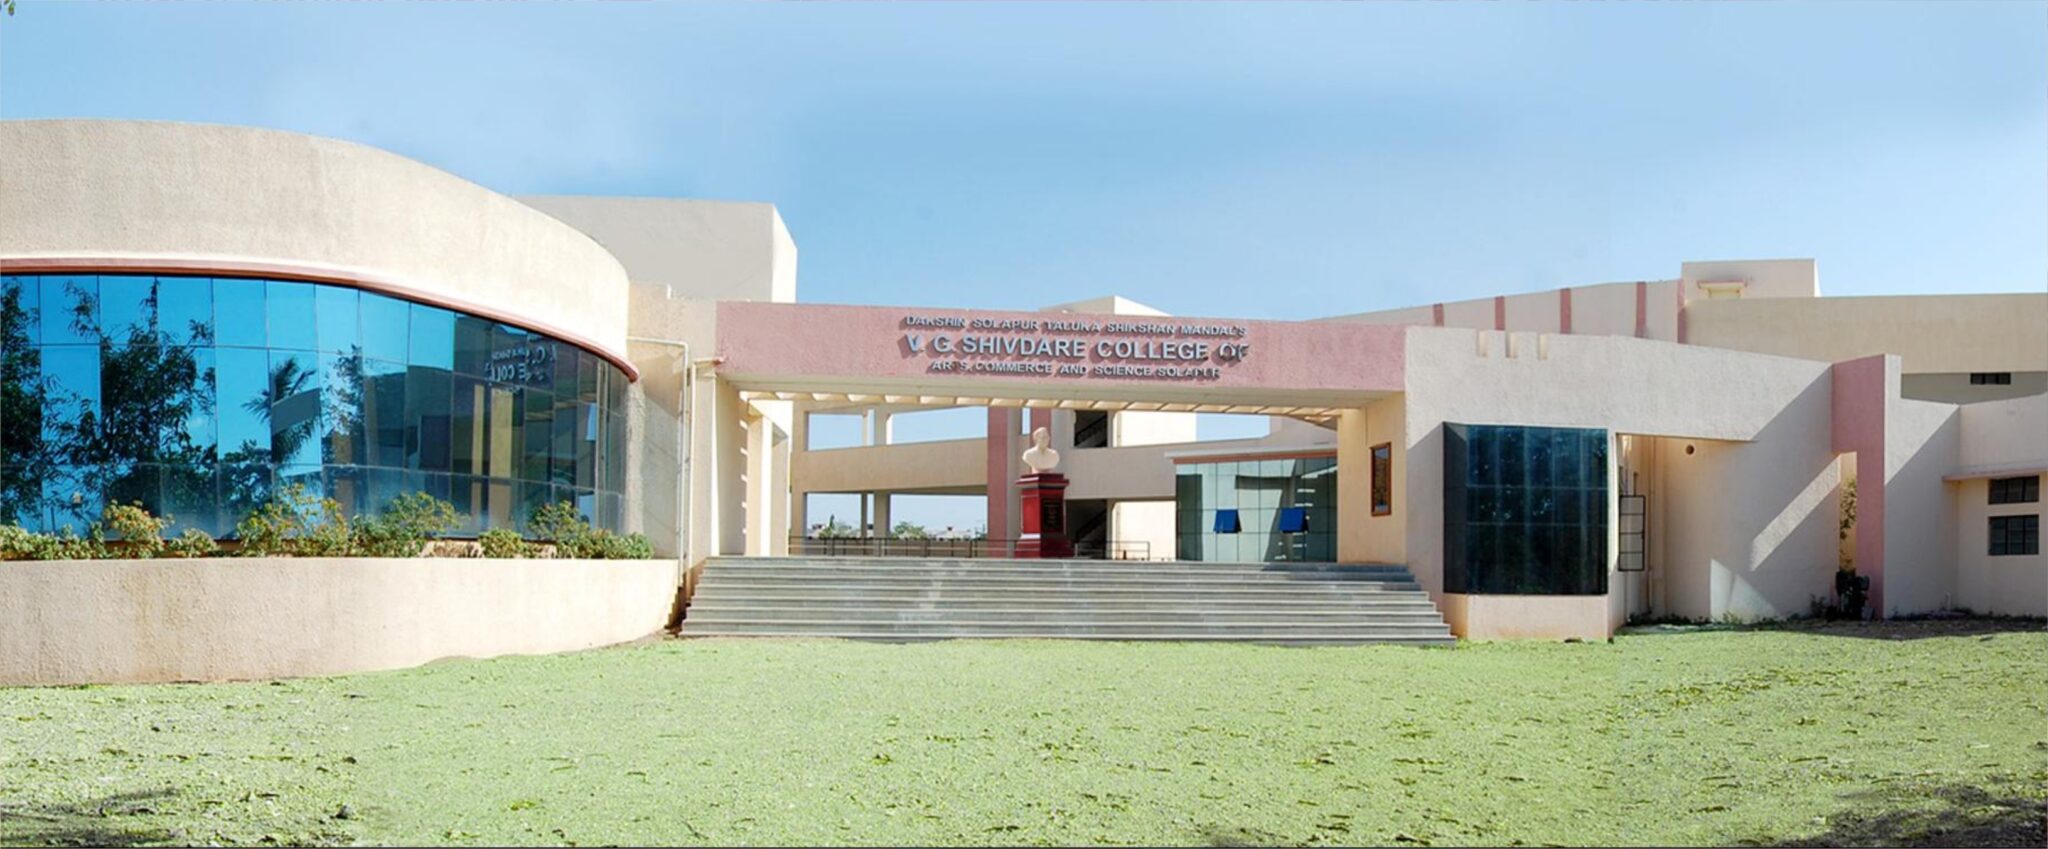 V. G. Shivdare College of Arts , Commerce and Science